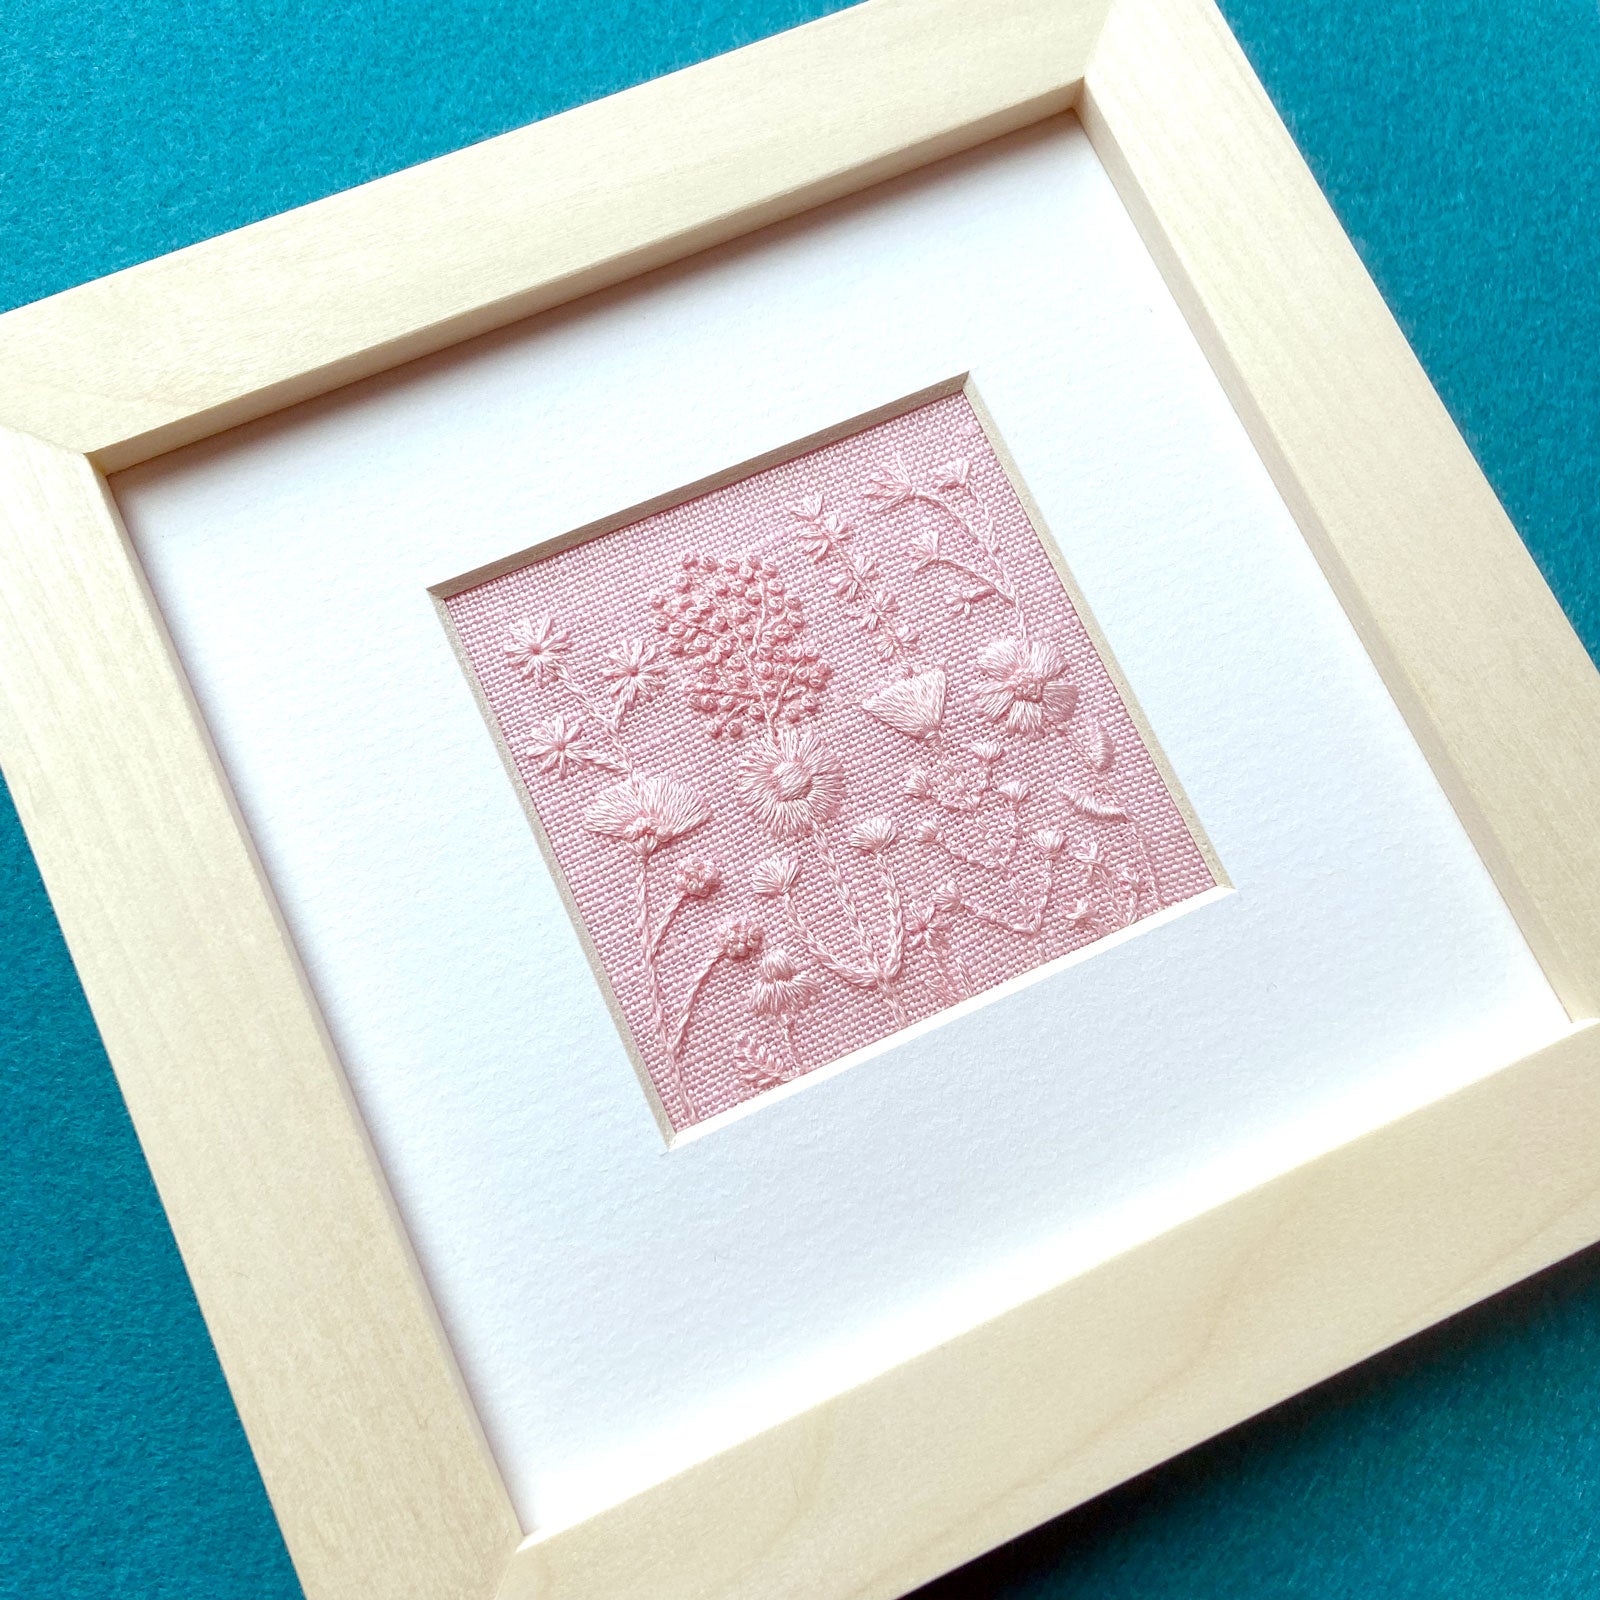 Monochromatic Pink Flowers (2.5") on Pink Linen Hand Embroidered Art